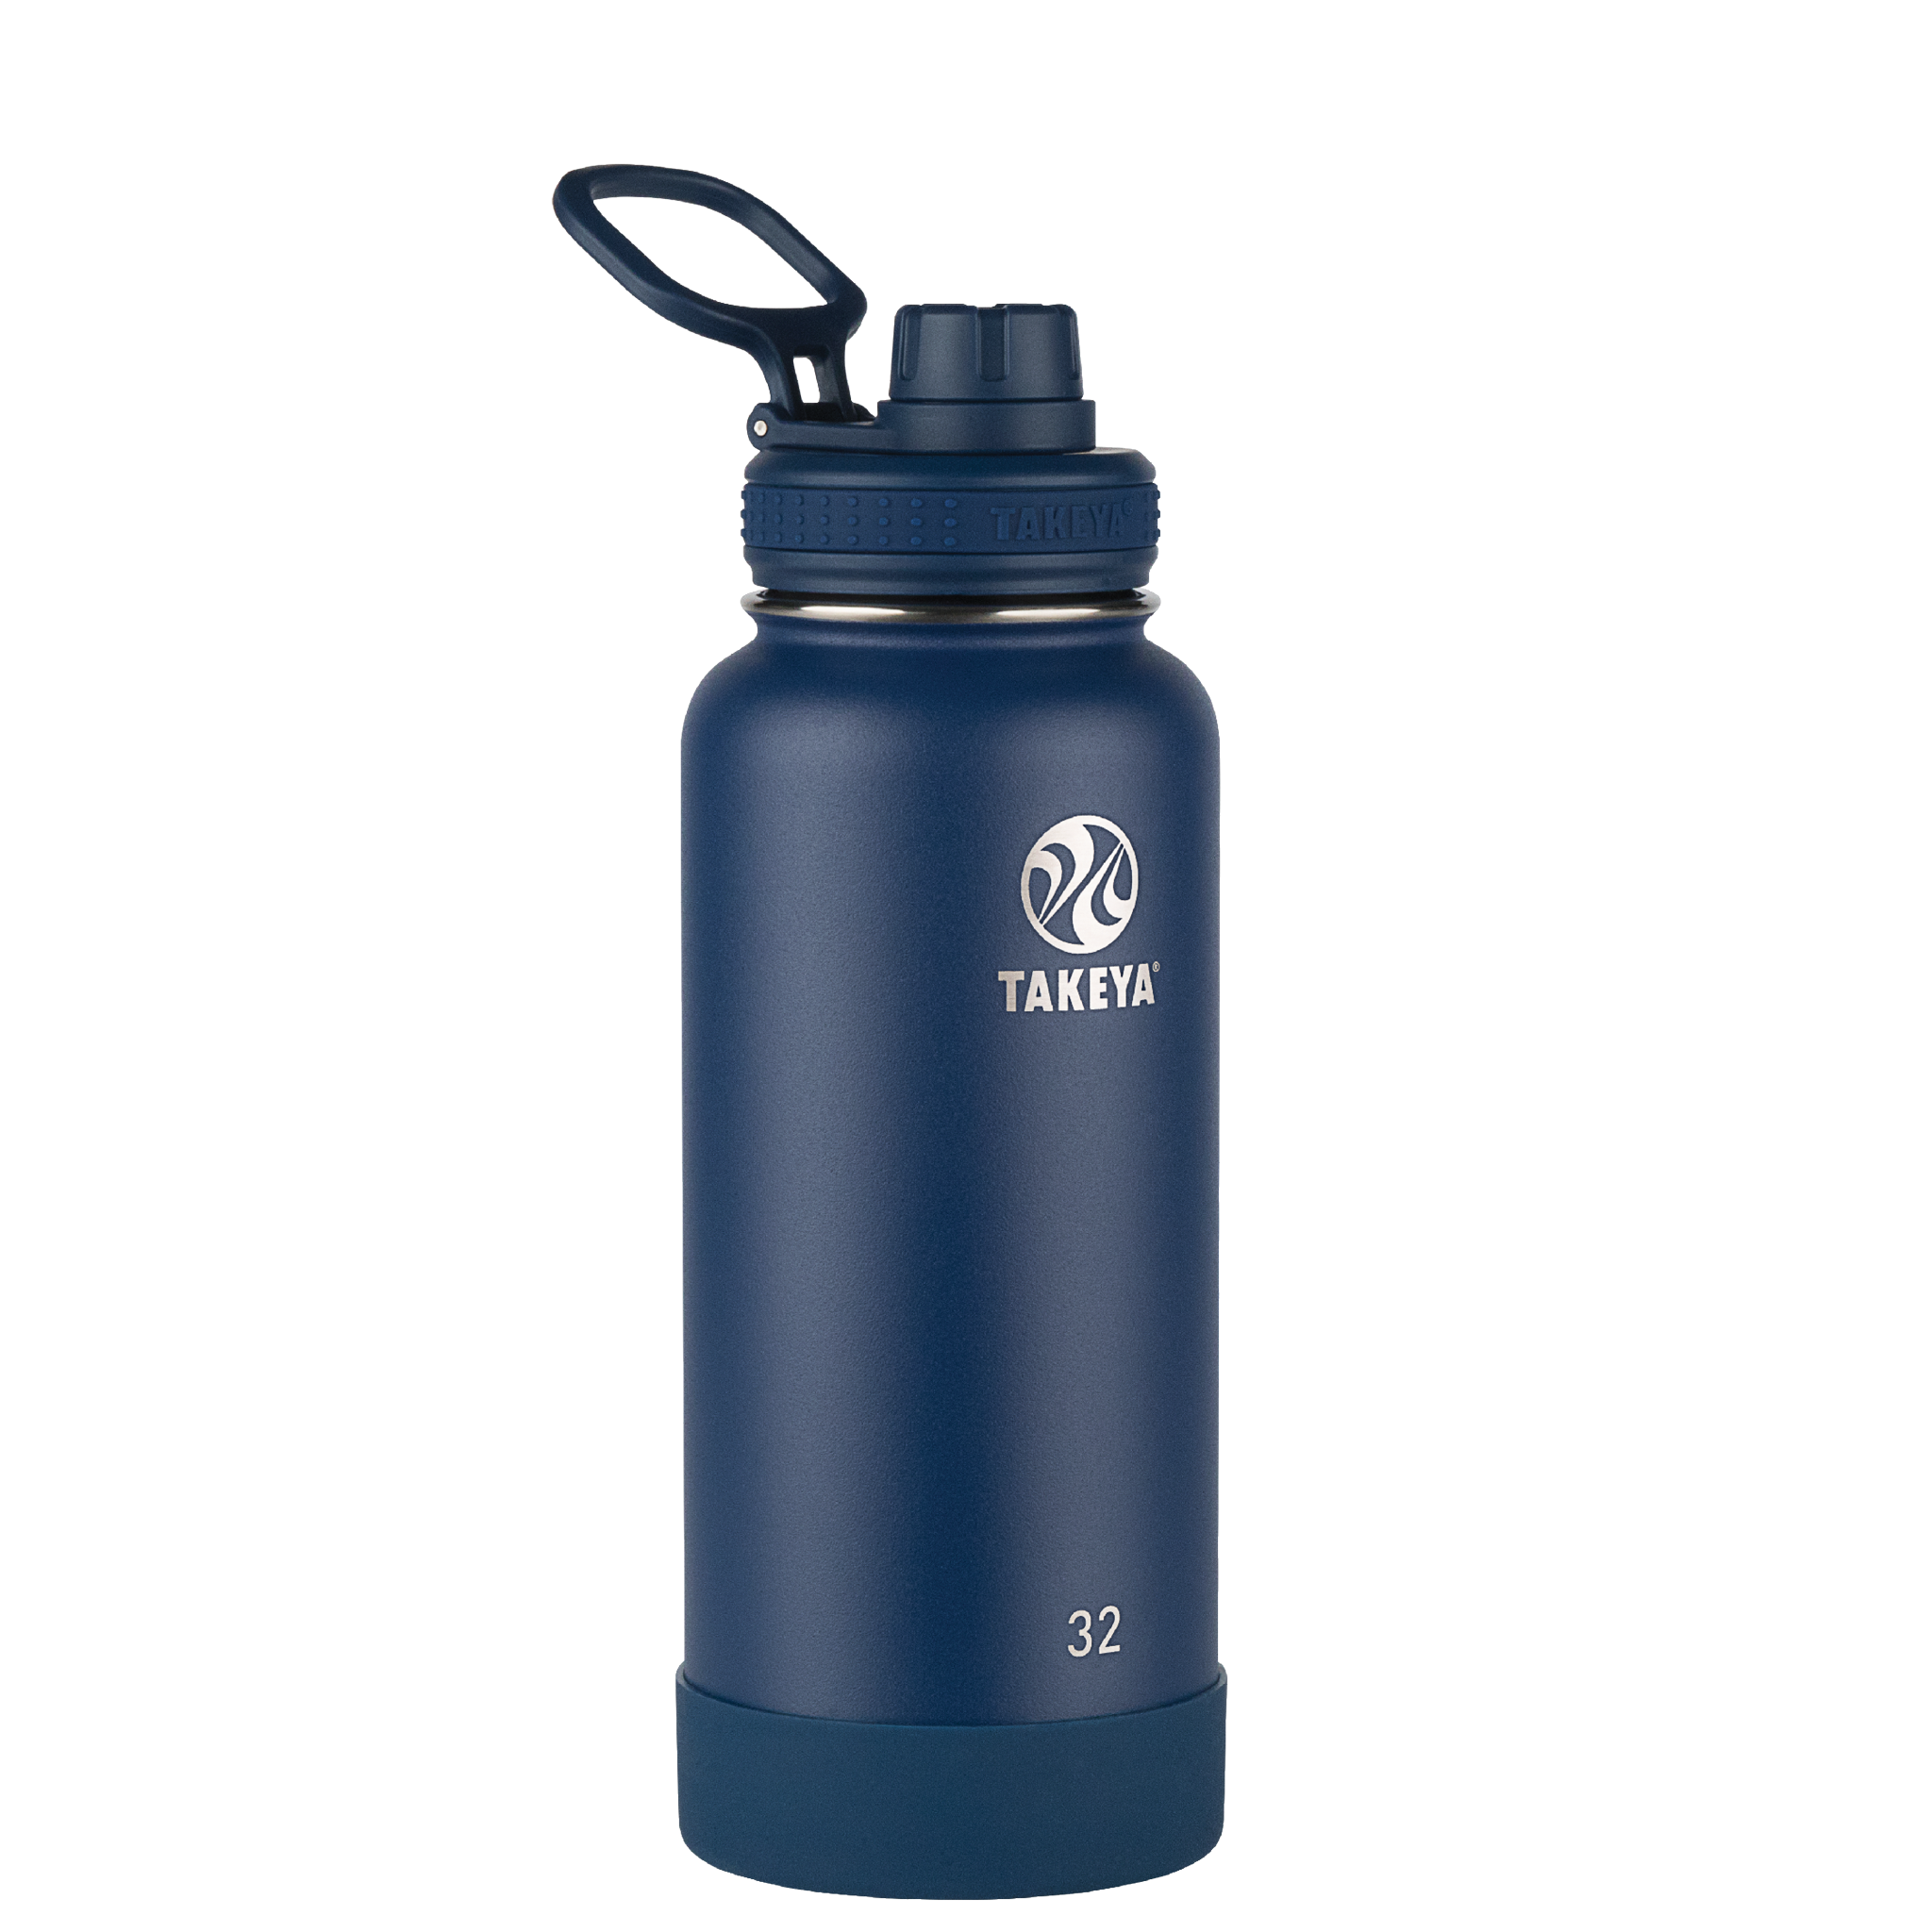 NEW! Takeya SET OF 2 INSULATED WATER BOTTLES w/SPOUT LIDS in Midnight Blue  24 oz